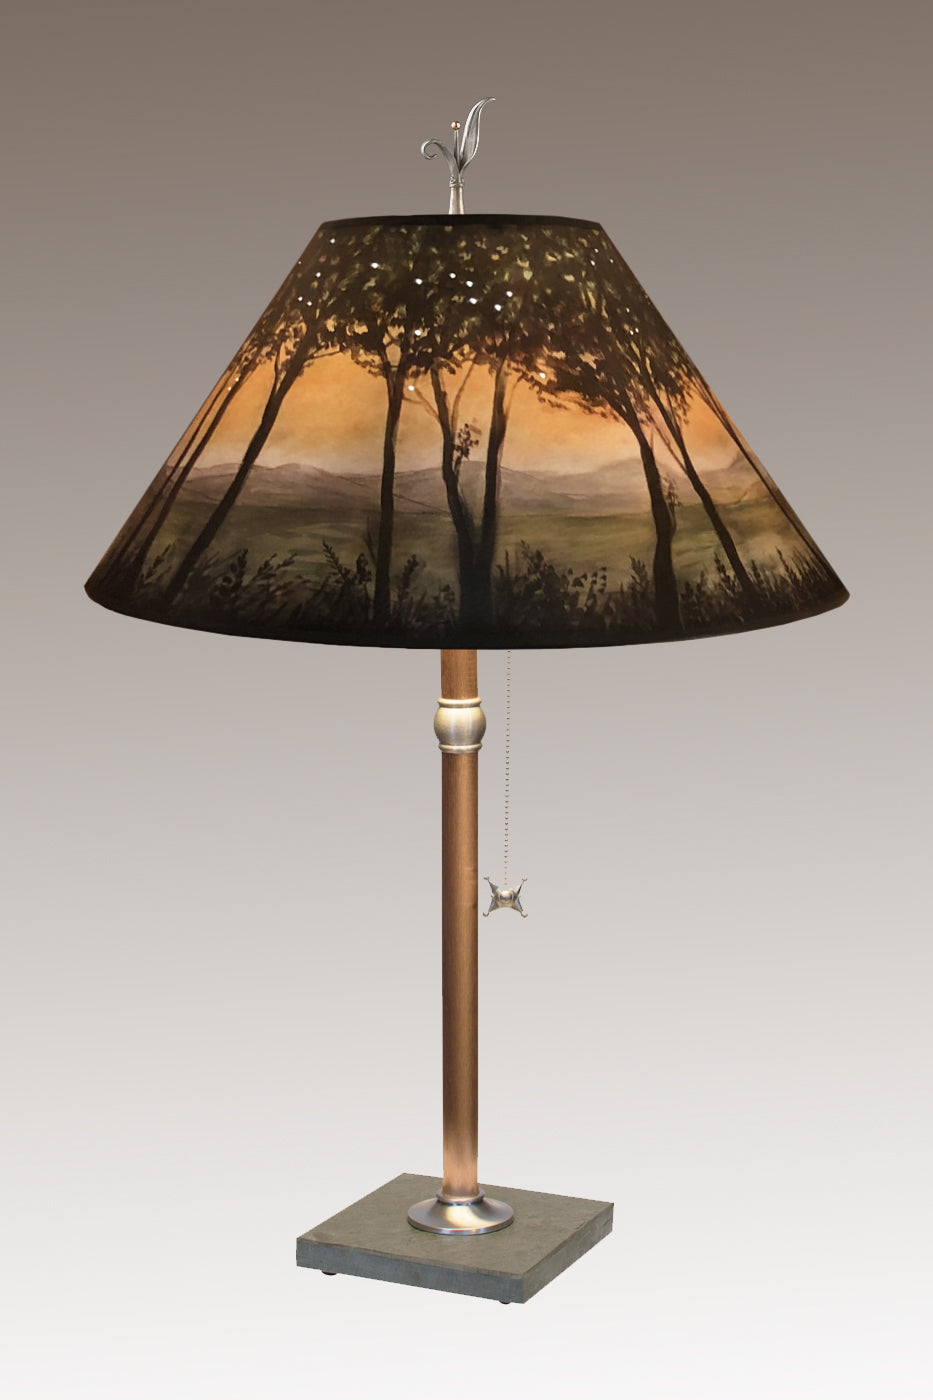 Copper Table Lamp with Large Conical Shade in Dawn